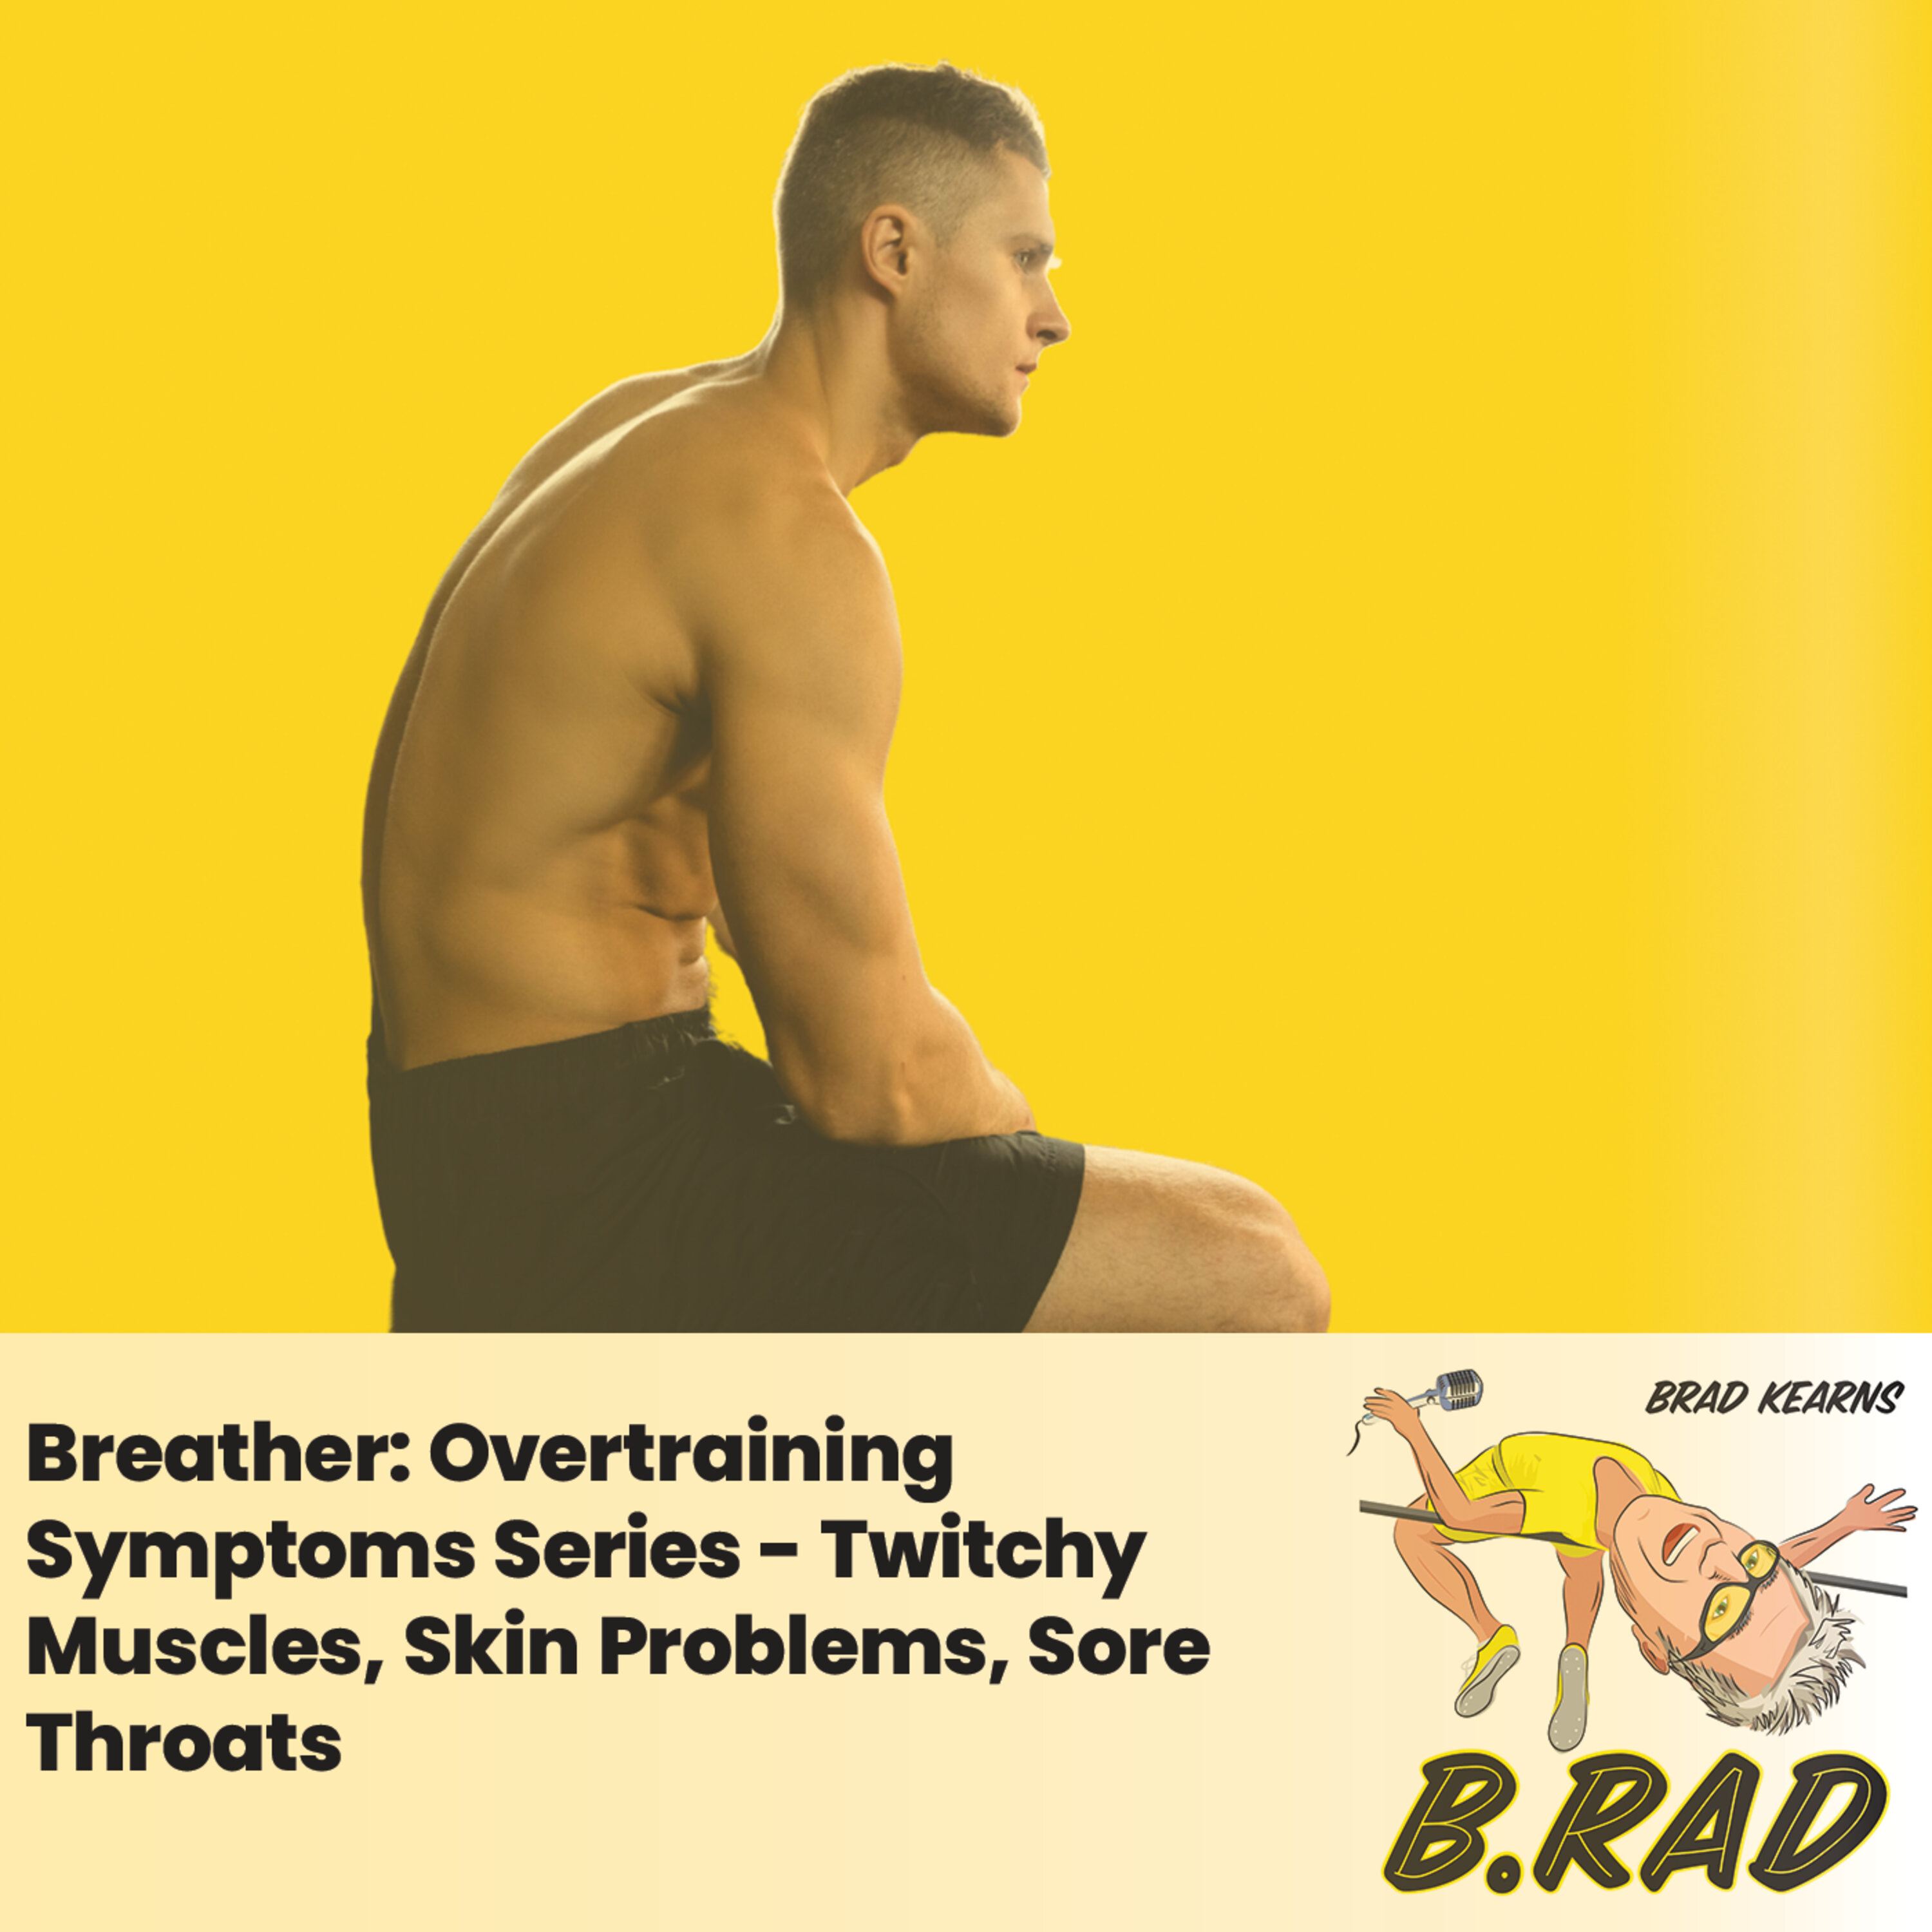 Breather: Overtraining Symptoms Series - Twitchy Muscles, Skin Problems, Sore Throats